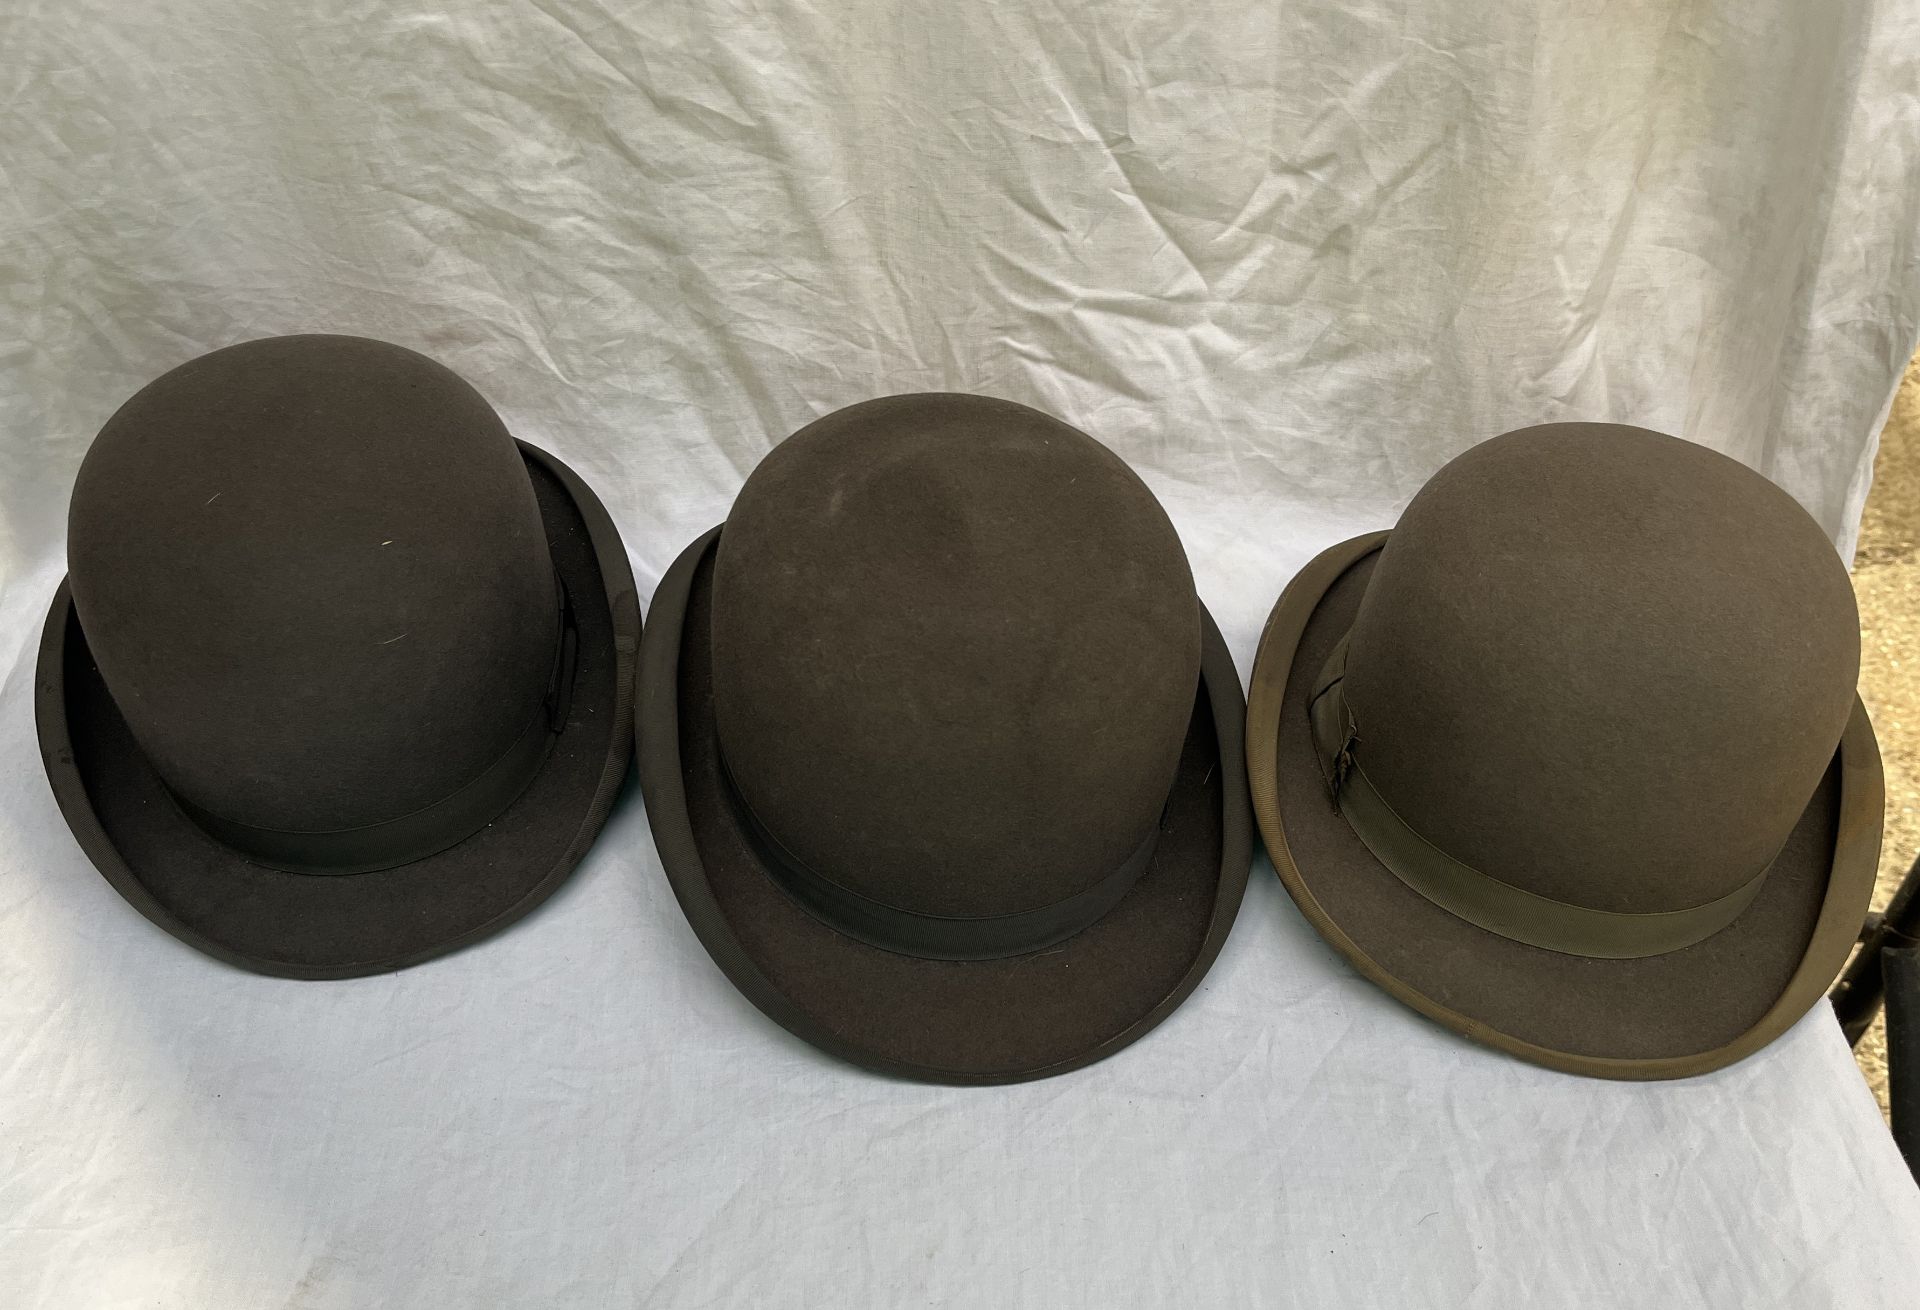 Five grey bowler hats and a black bowler hat - Image 3 of 3